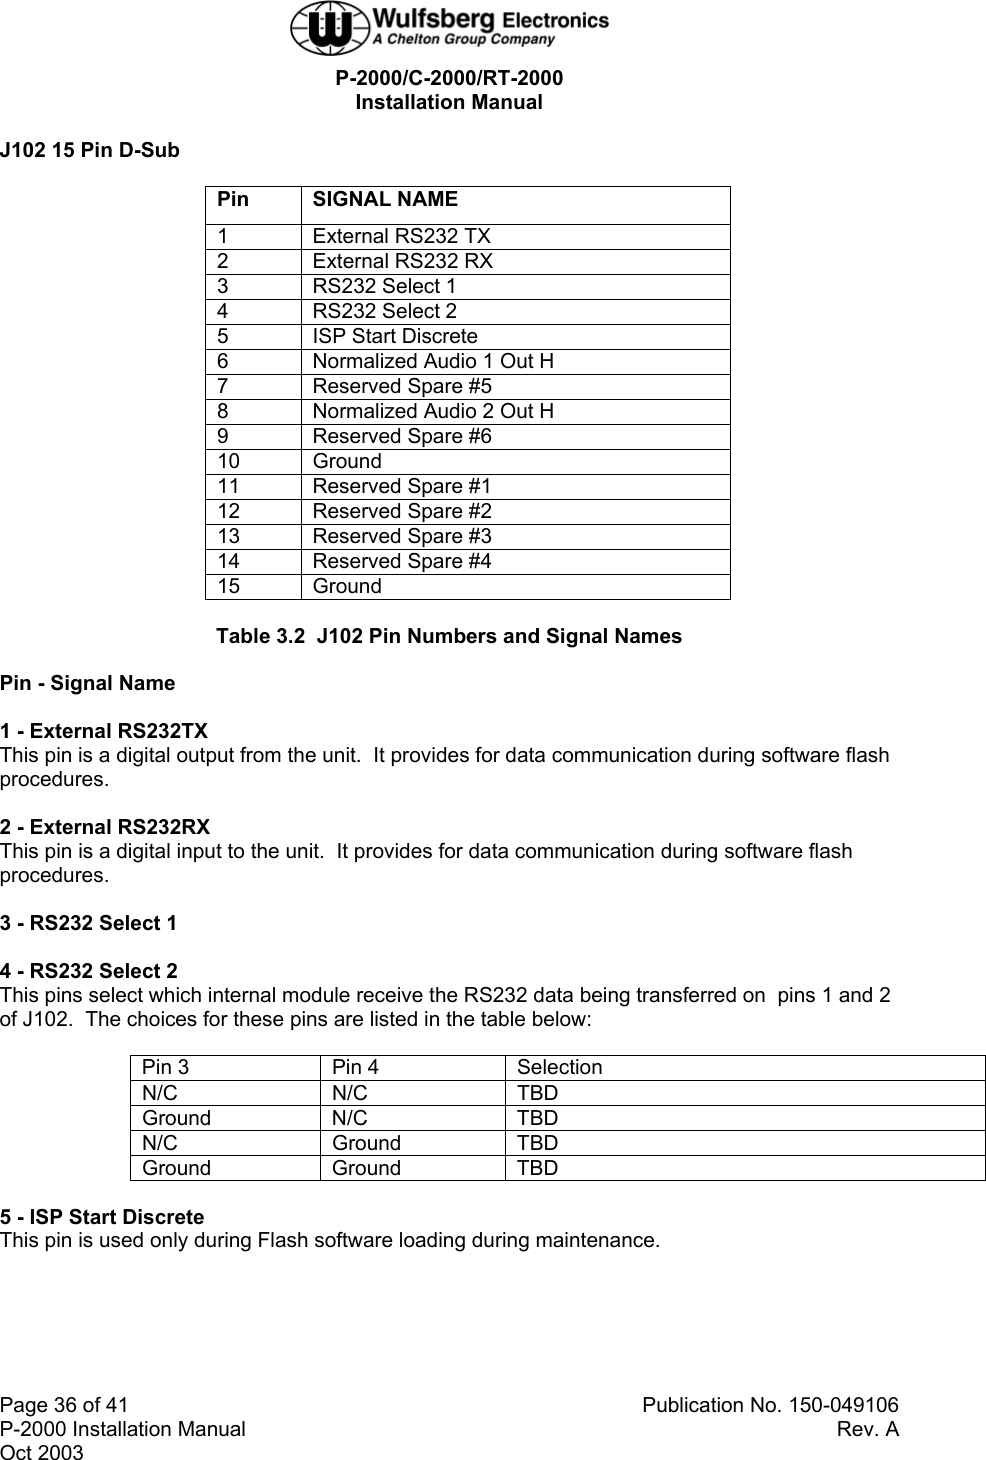  P-2000/C-2000/RT-2000 Installation Manual  Page 36 of 41   Publication No. 150-049106 P-2000 Installation Manual  Rev. A Oct 2003  J102 15 Pin D-Sub  Pin SIGNAL NAME 1  External RS232 TX 2  External RS232 RX 3  RS232 Select 1 4  RS232 Select 2 5  ISP Start Discrete 6  Normalized Audio 1 Out H 7  Reserved Spare #5 8  Normalized Audio 2 Out H 9  Reserved Spare #6 10 Ground 11  Reserved Spare #1 12  Reserved Spare #2 13  Reserved Spare #3 14  Reserved Spare #4 15 Ground  Table 3.2  J102 Pin Numbers and Signal Names  Pin - Signal Name  1 - External RS232TX This pin is a digital output from the unit.  It provides for data communication during software flash procedures.  2 - External RS232RX This pin is a digital input to the unit.  It provides for data communication during software flash procedures.  3 - RS232 Select 1  4 - RS232 Select 2 This pins select which internal module receive the RS232 data being transferred on  pins 1 and 2 of J102.  The choices for these pins are listed in the table below:  Pin 3  Pin 4  Selection N/C N/C TBD Ground N/C  TBD N/C Ground TBD Ground Ground TBD  5 - ISP Start Discrete This pin is used only during Flash software loading during maintenance.   